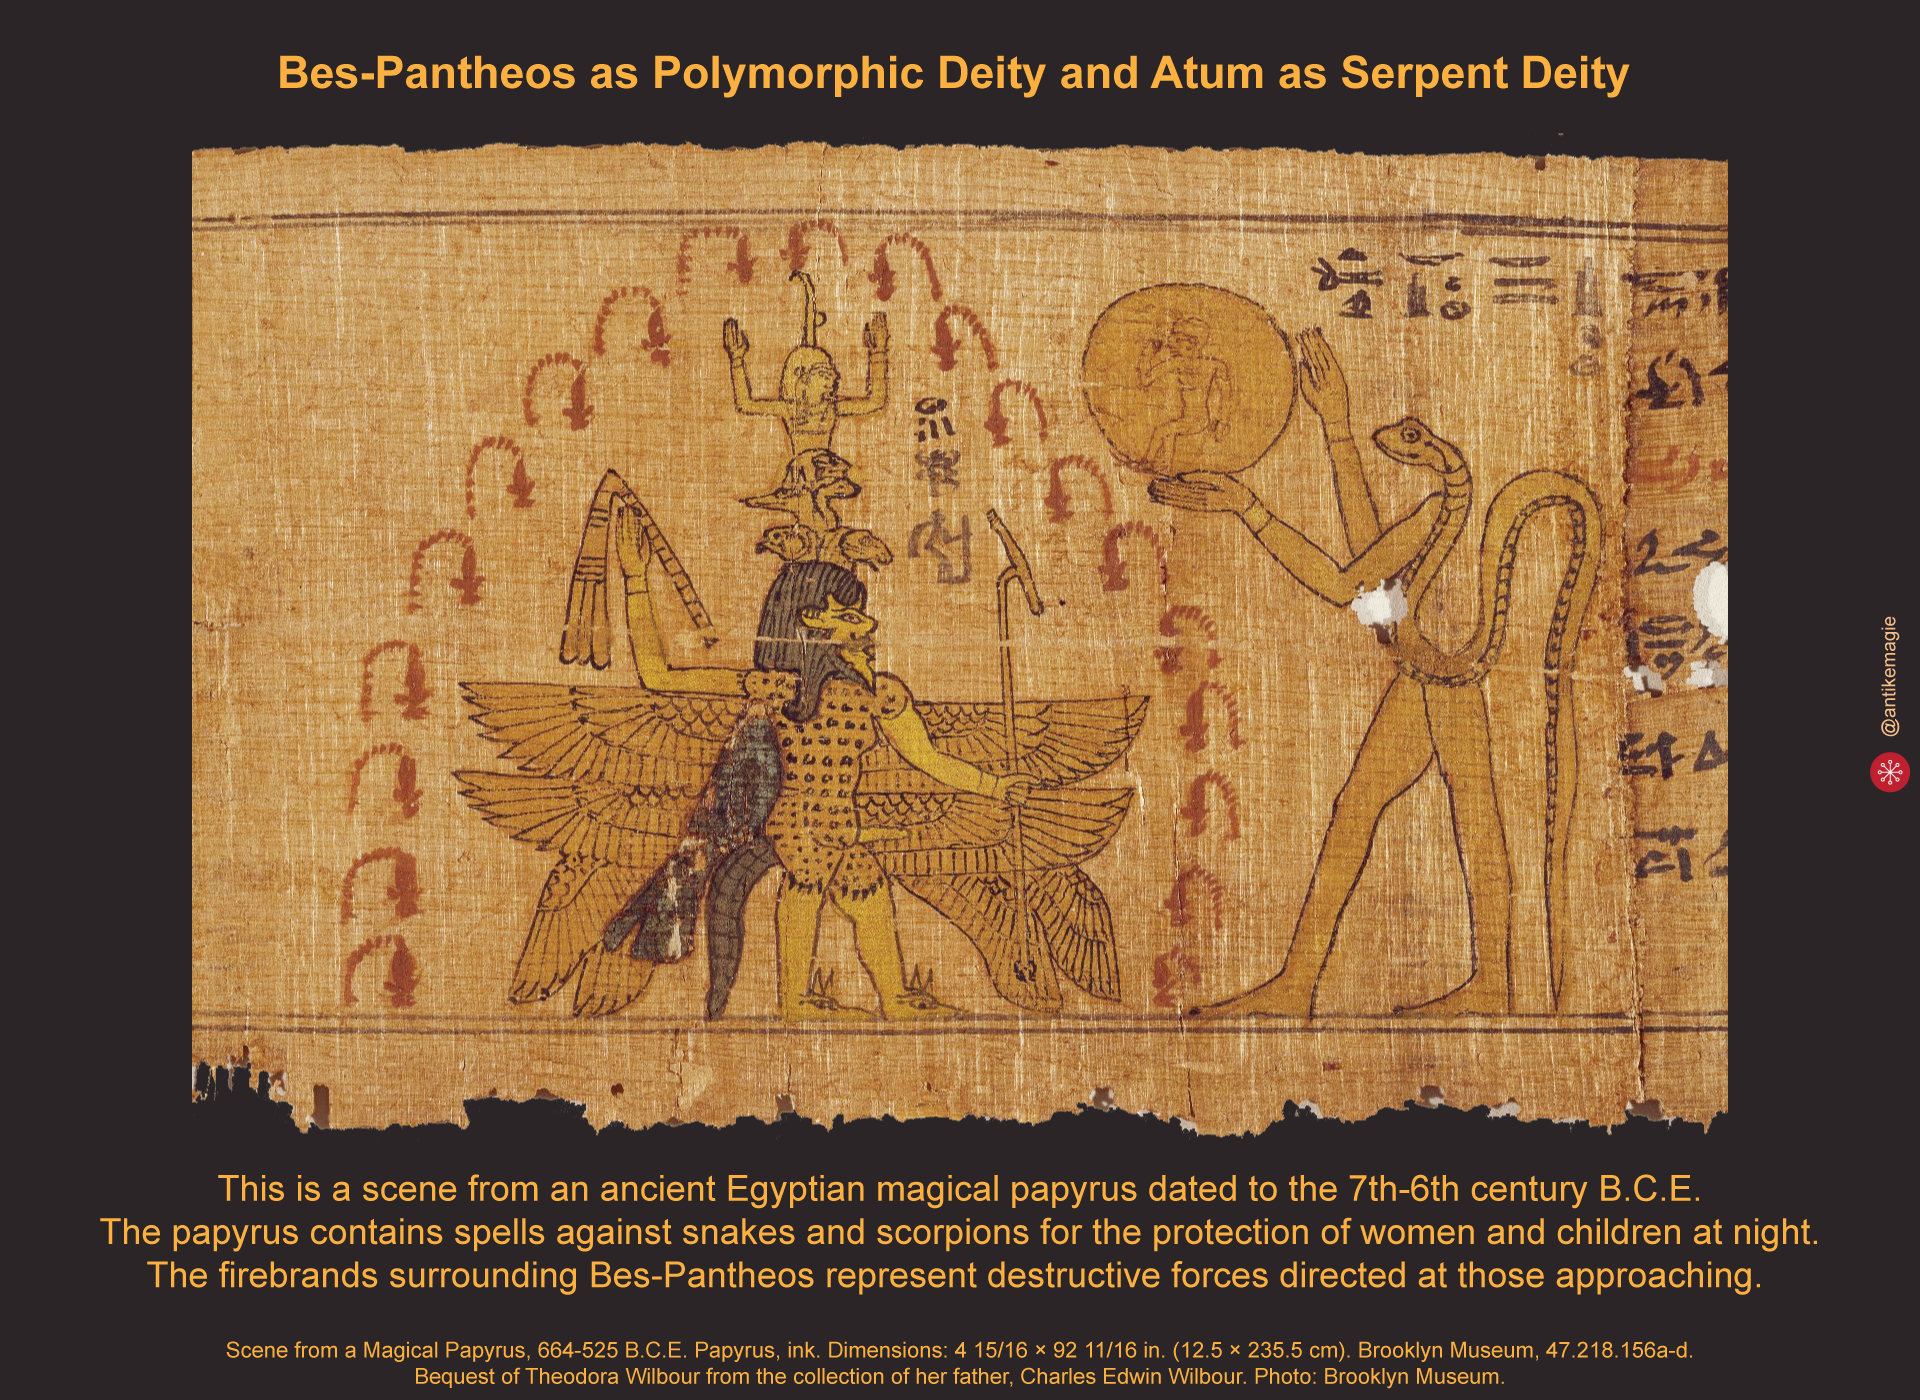 Scene from a Magical Papyrus, 664-525 B.C.E. Papyrus, ink. Dimensions: 4 15/16 × 92 11/16 in. (12.5 × 235.5 cm). Brooklyn Museum, 47.218.156a-d.Bequest of Theodora Wilbour from the collection of her father, Charles Edwin Wilbour. Photo: Brooklyn Museum.